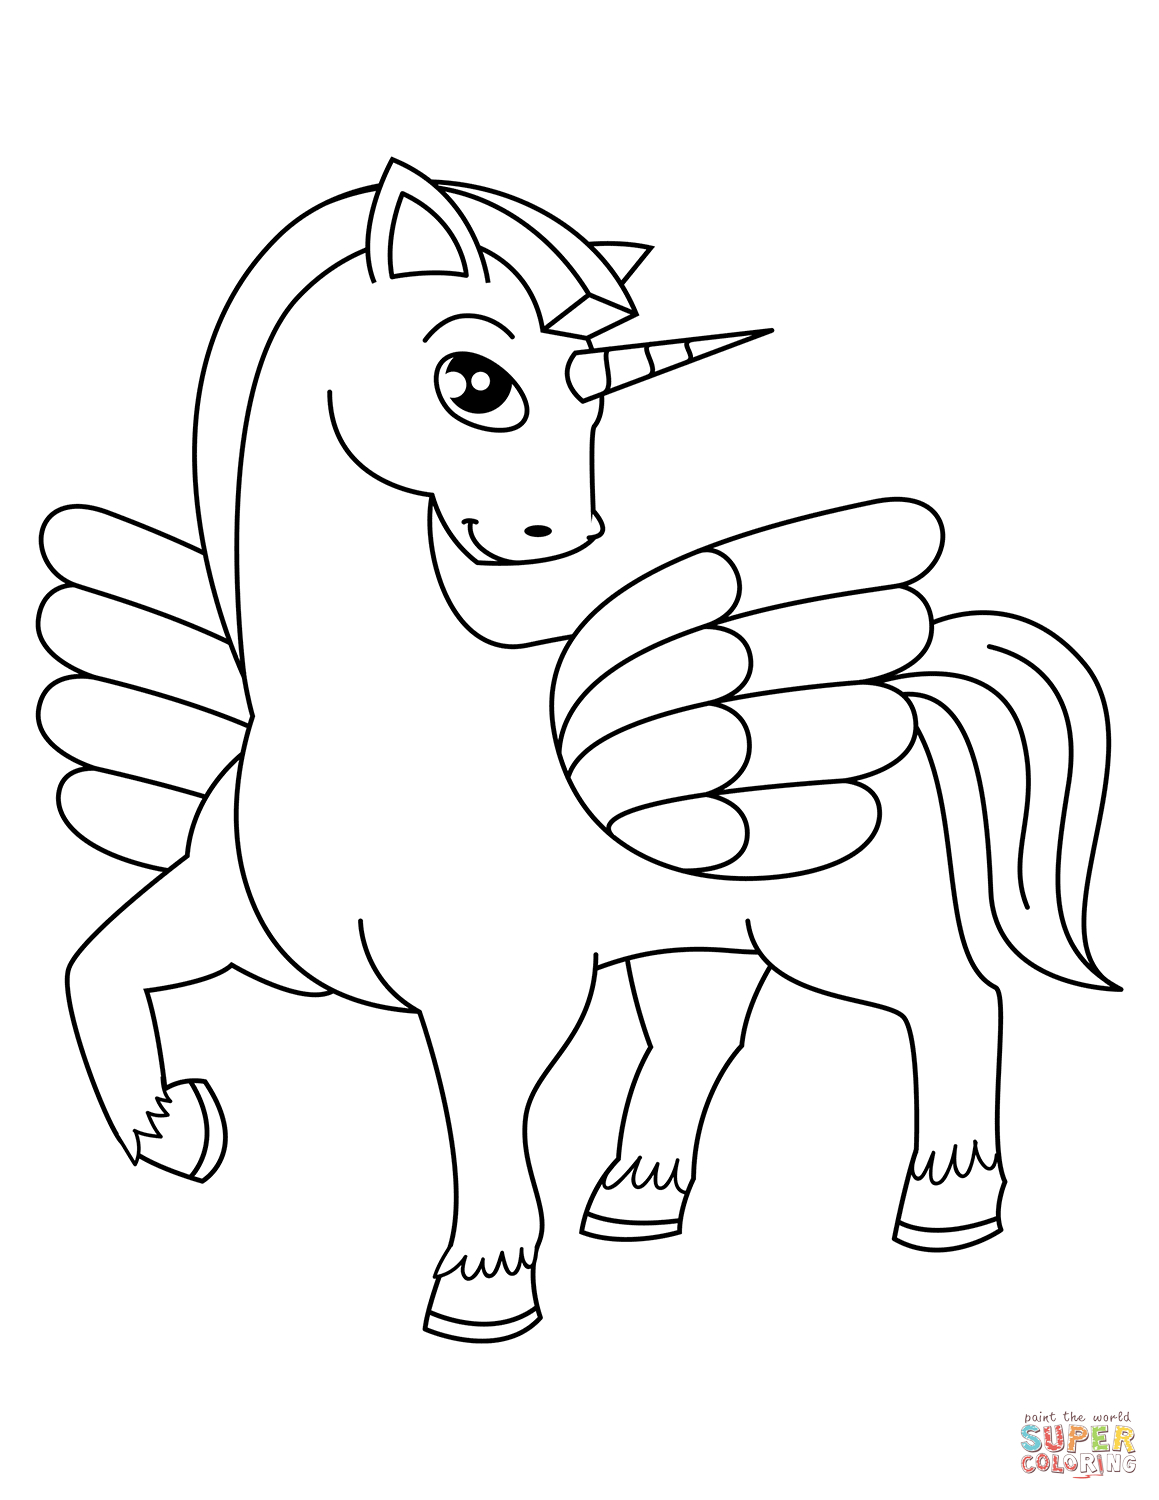 Unicorn Coloring Pages | Free Coloring Pages - Free Printable Unicorn Coloring Pages